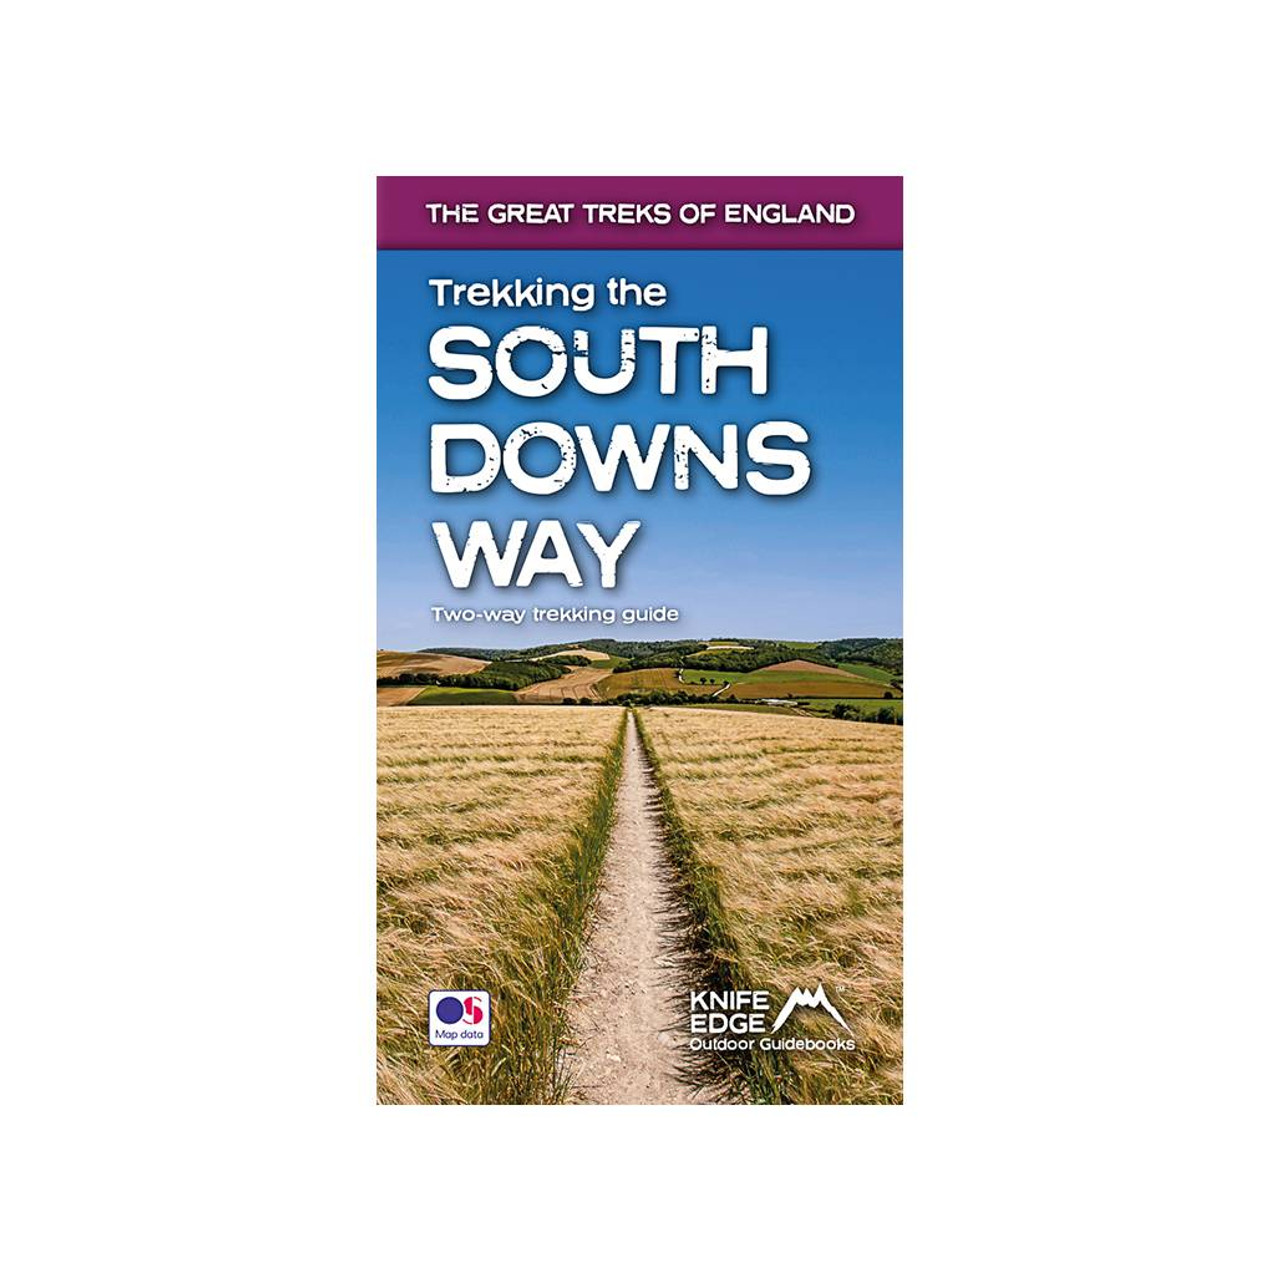 Trekking The South Downs Way - Two-way Trekking Guide